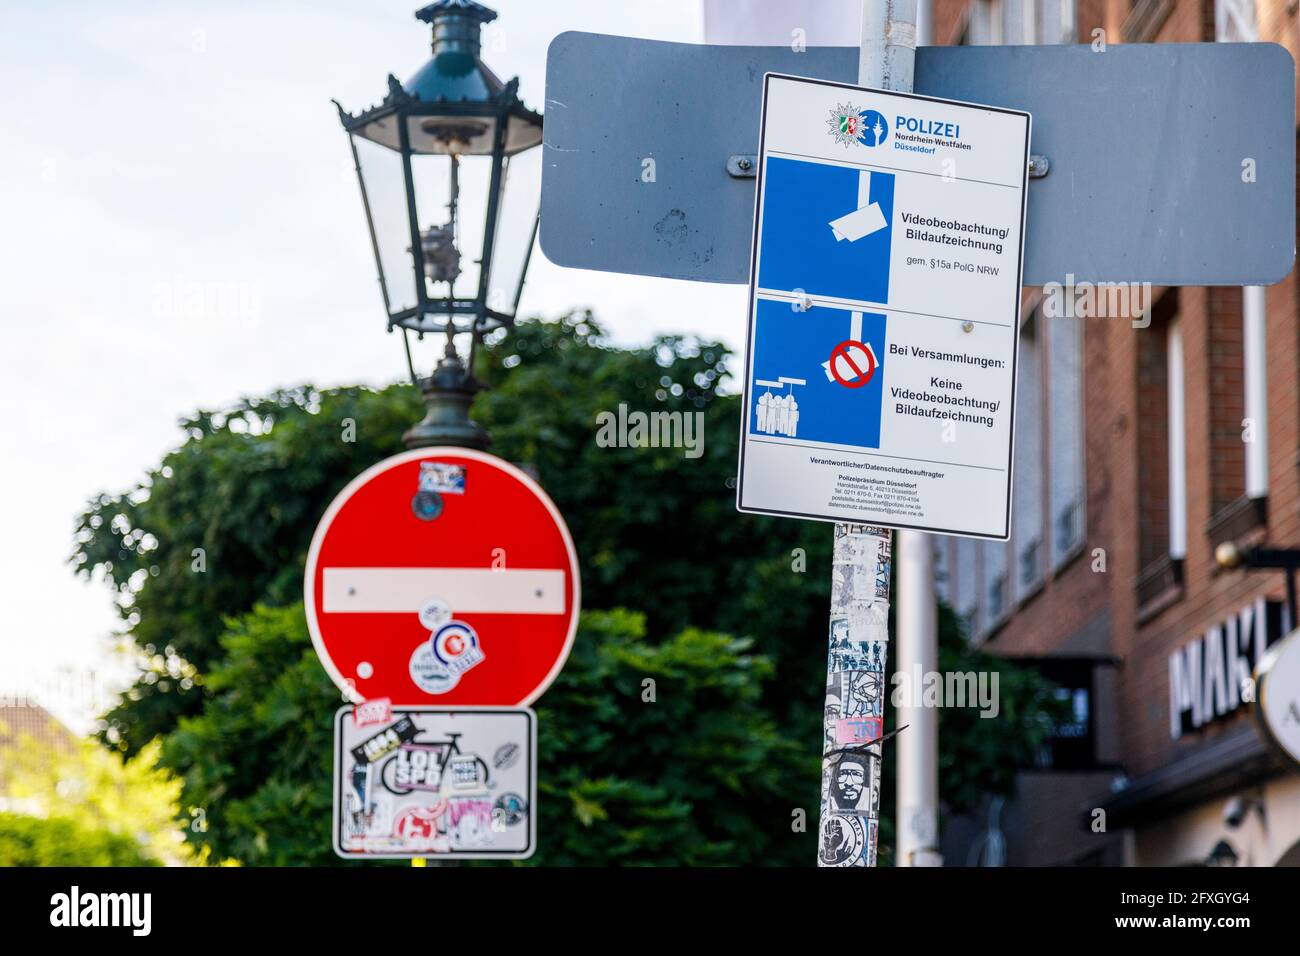 Information sign of the police, video surveillance in old town Stock Photo